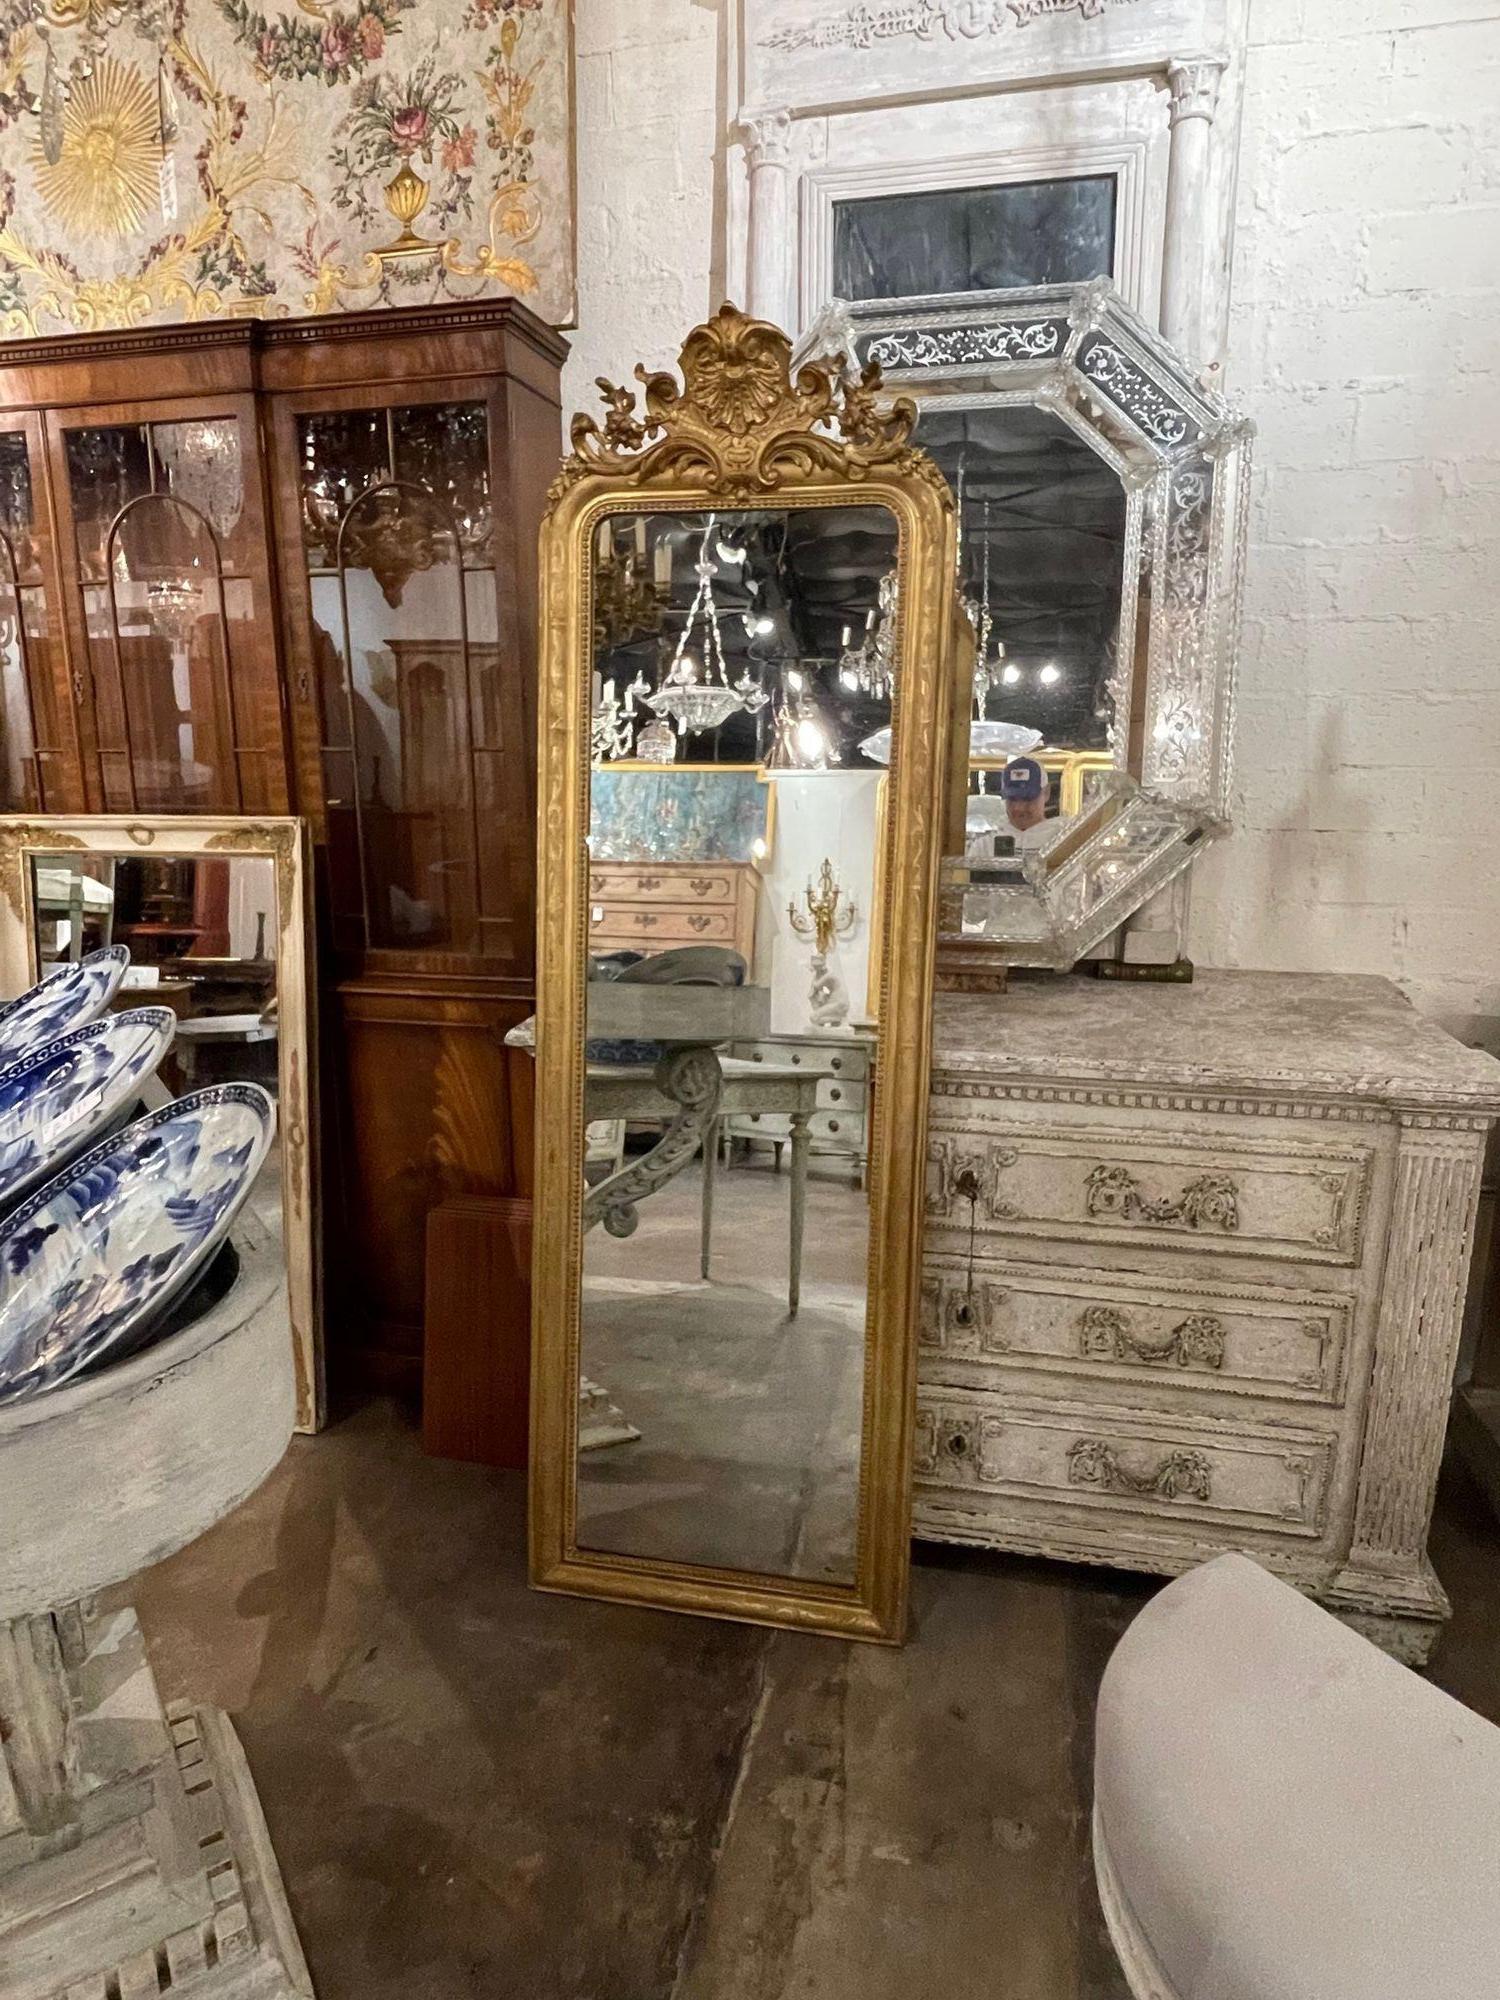 Lovely 19th century French Louis Philippe narrow mirror. A rare size with beautiful a carved crest at the top and a floral pattern. So pretty!!